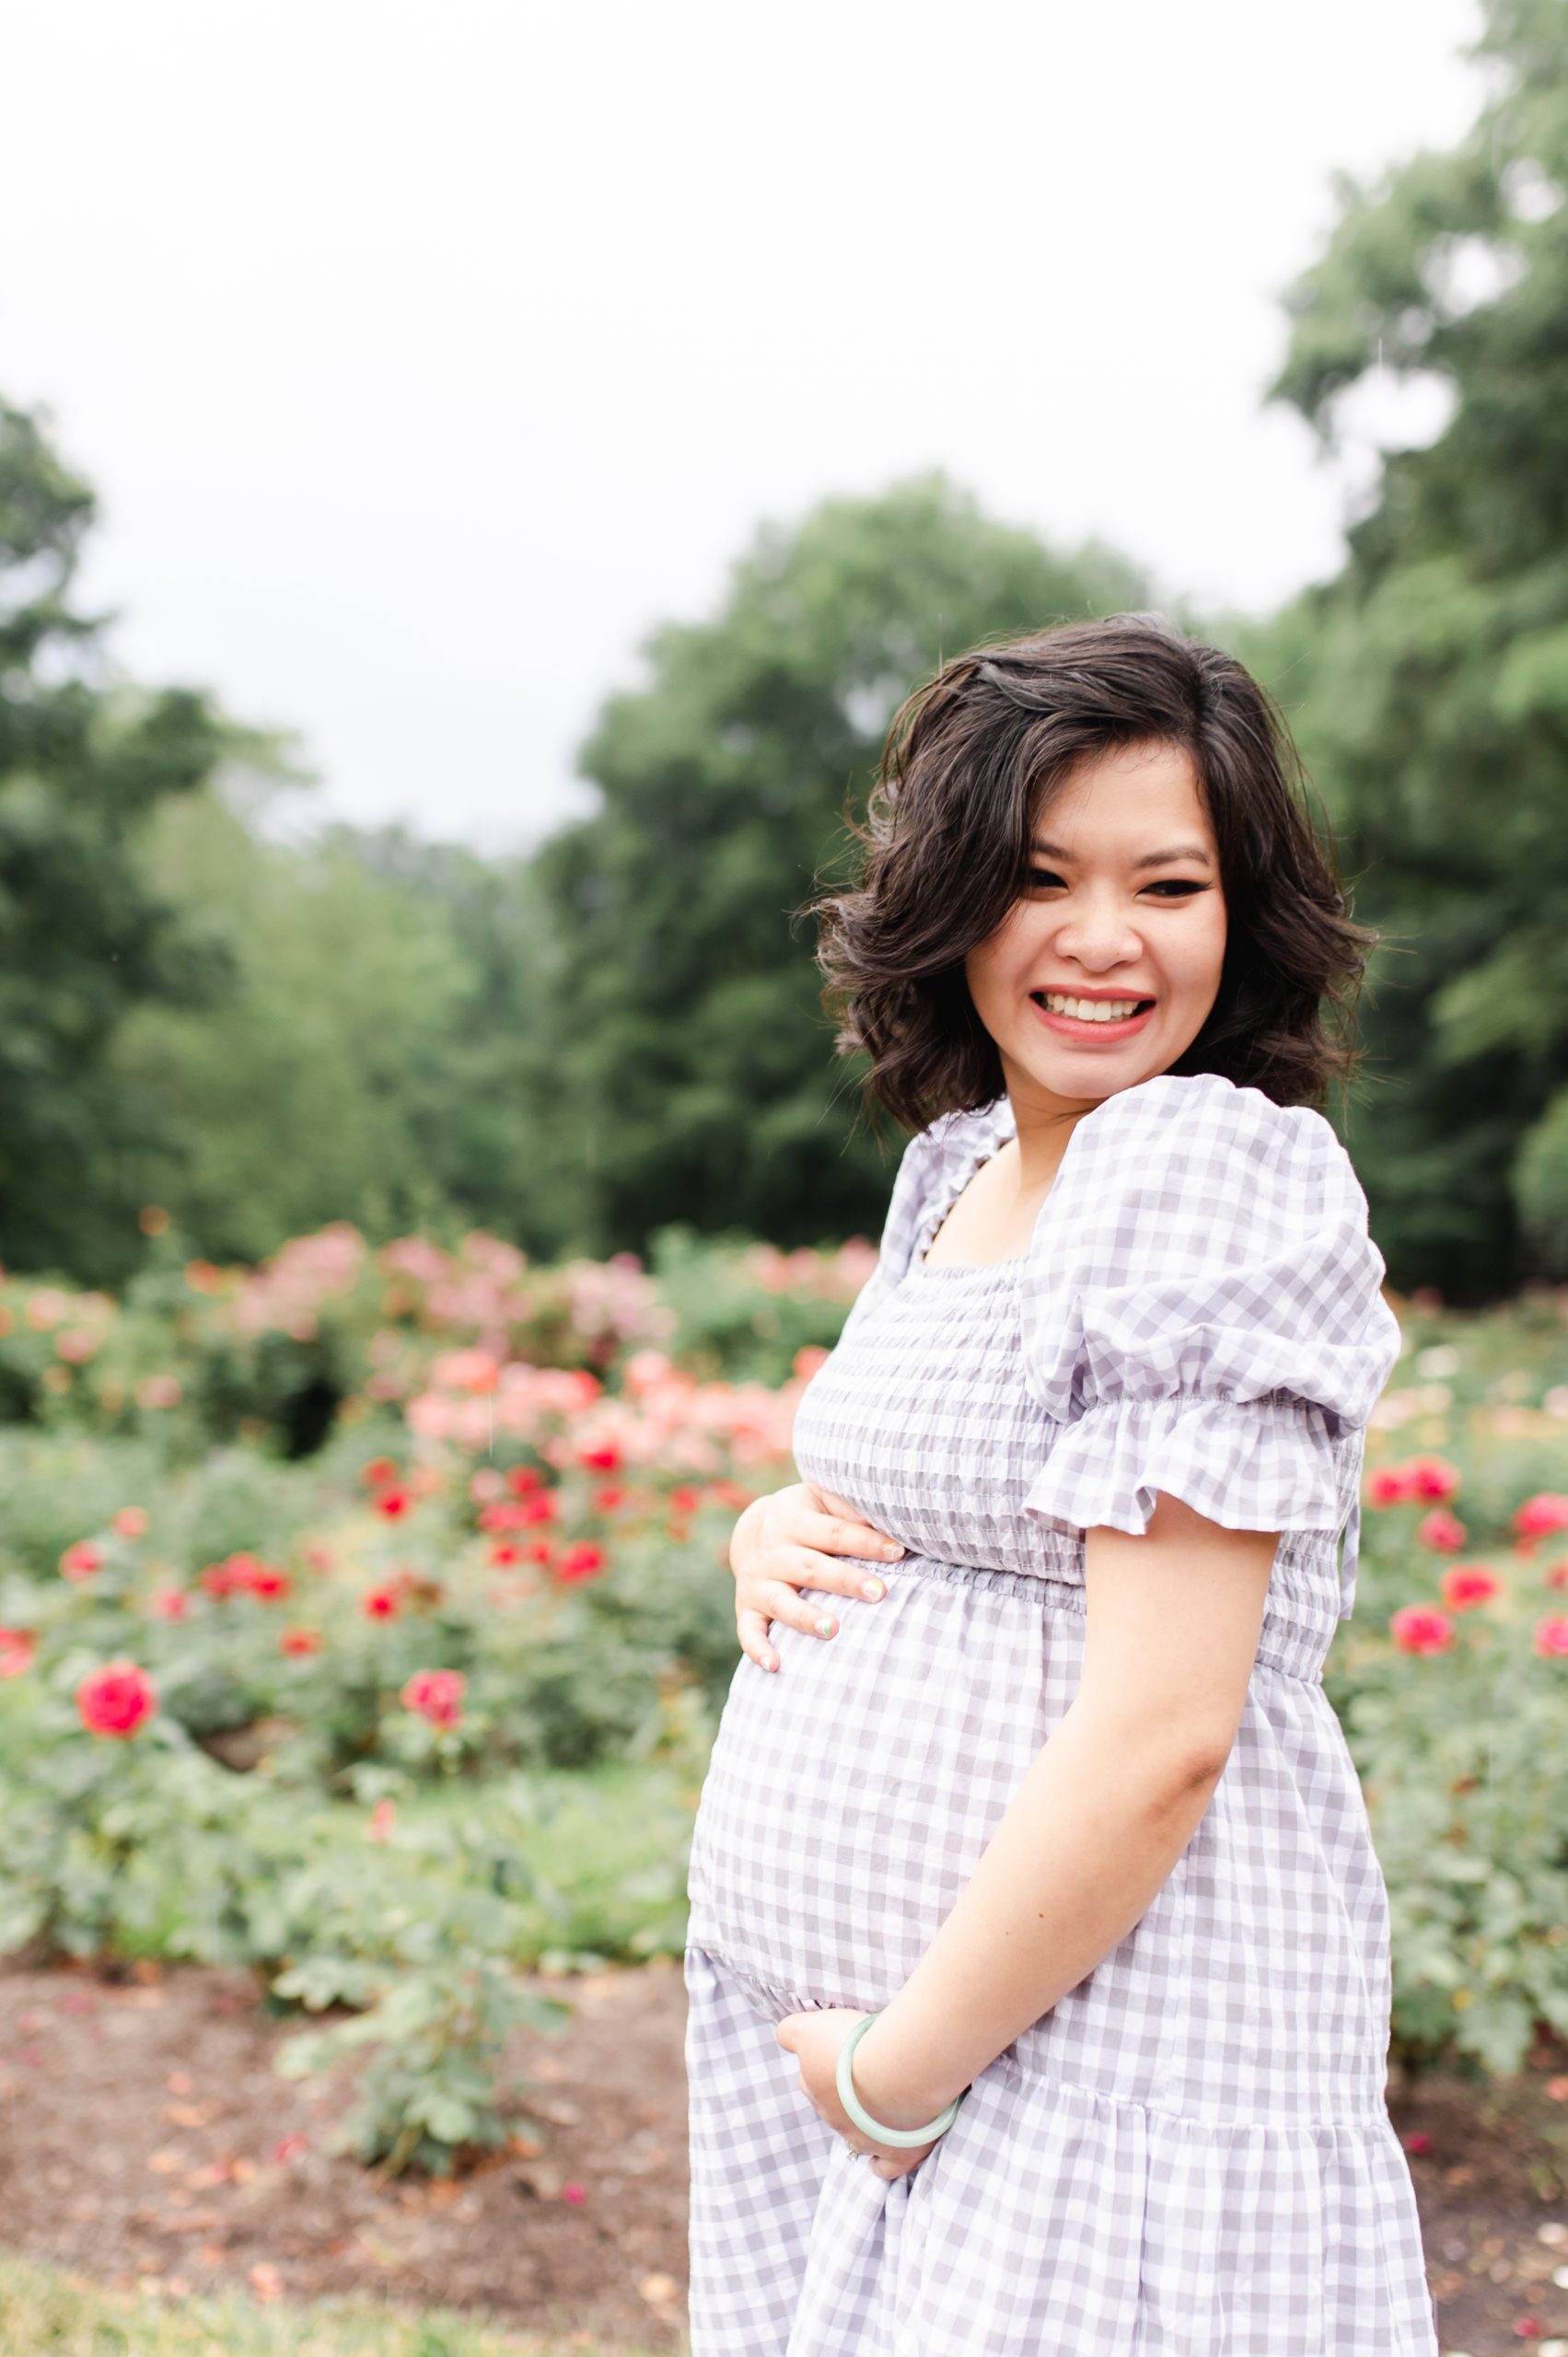 mom-to-be smiling and cradling bump amongst the roses at bon air park in arlington va by northern virginia maternity photographer